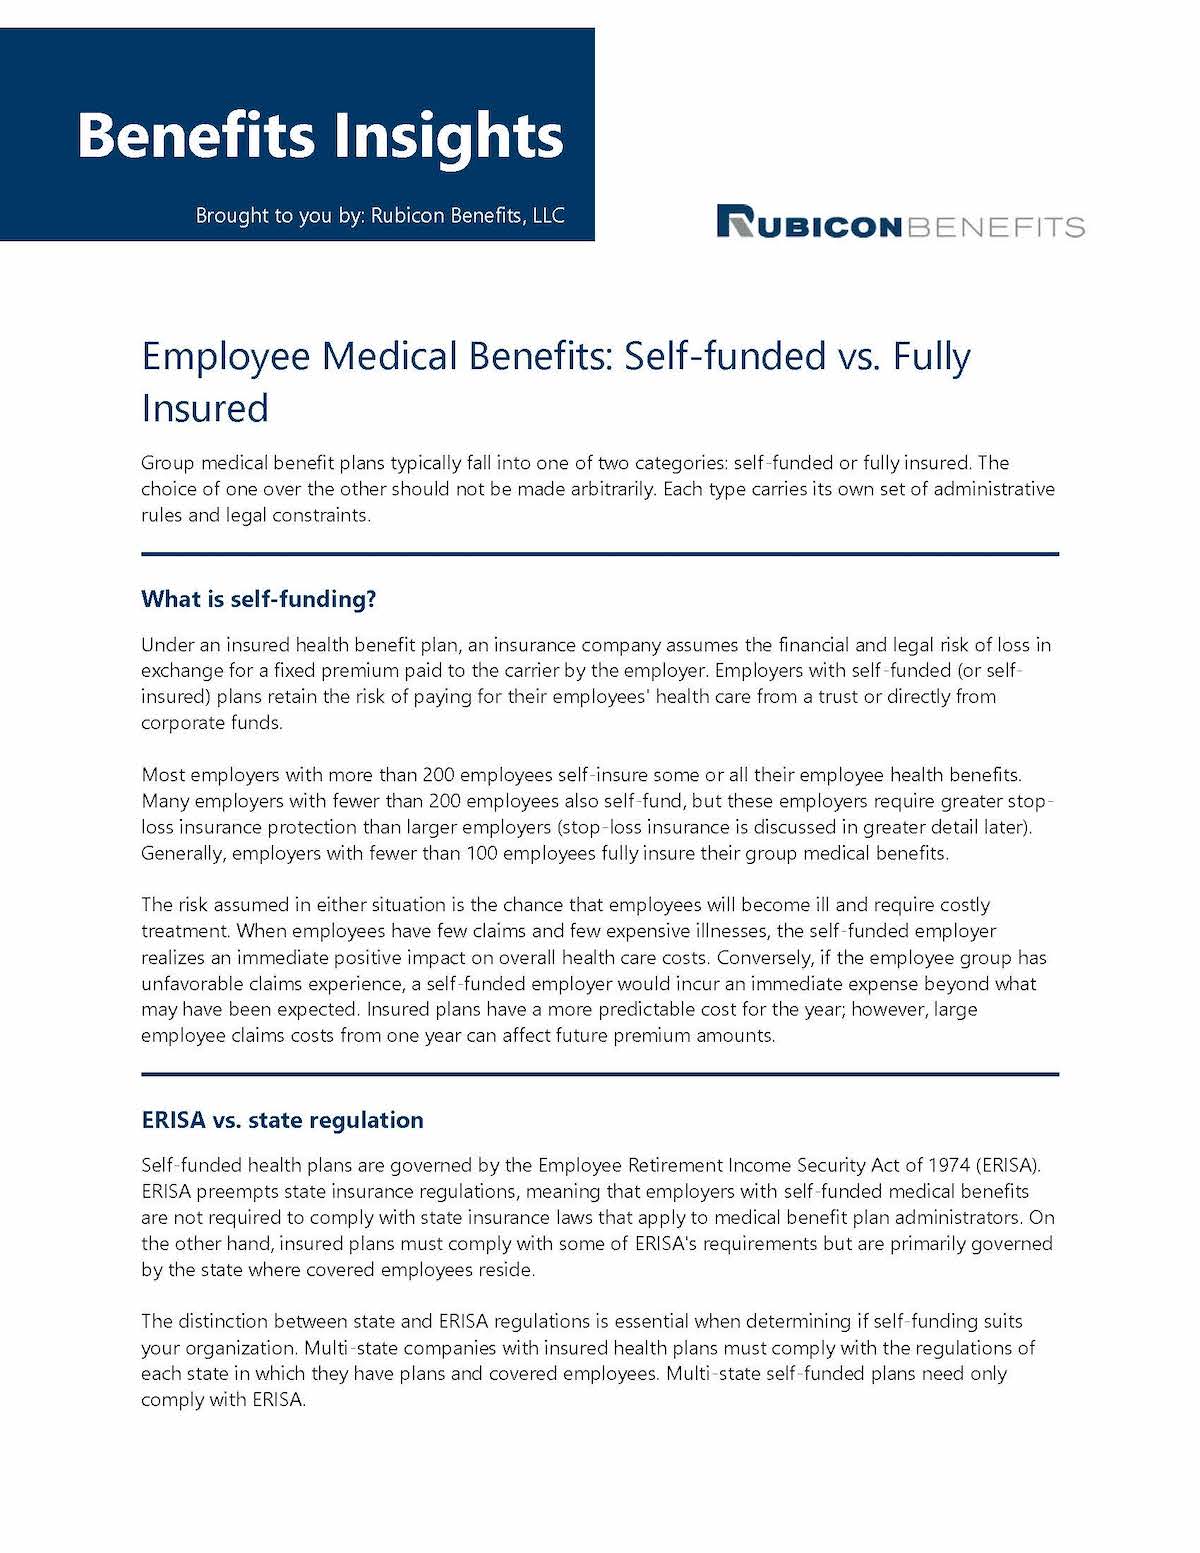 Employee Medical Benefits_ Self-funded vs. Fully Insured_Page_1